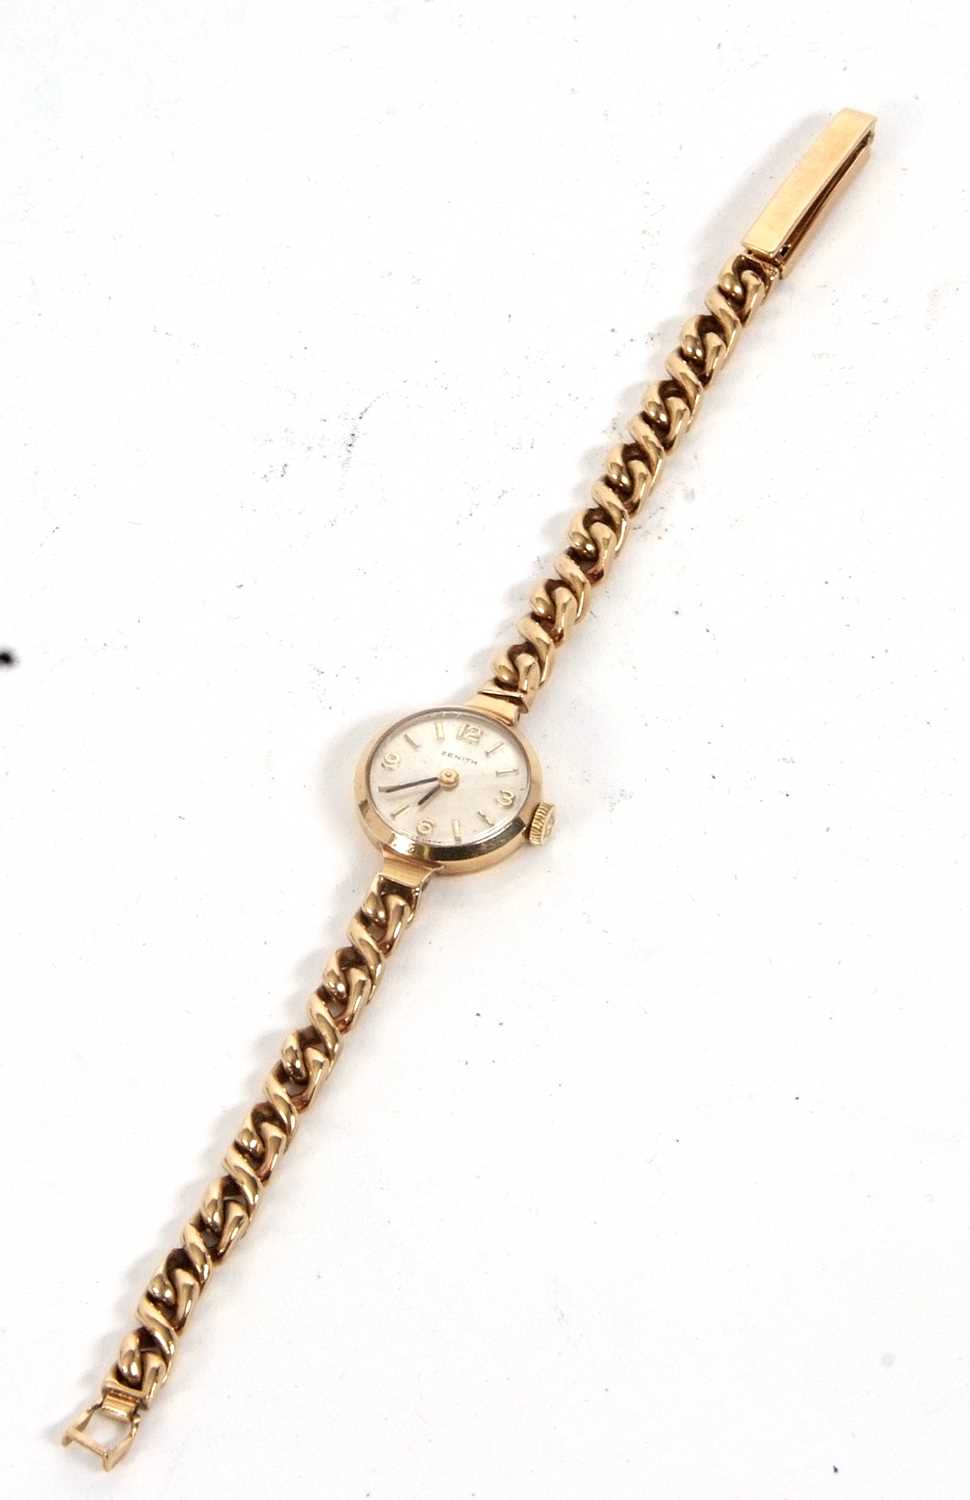 A 9ct gold Zenith lady's wristwatch, the watch is stamped 375 on the side of the case and the